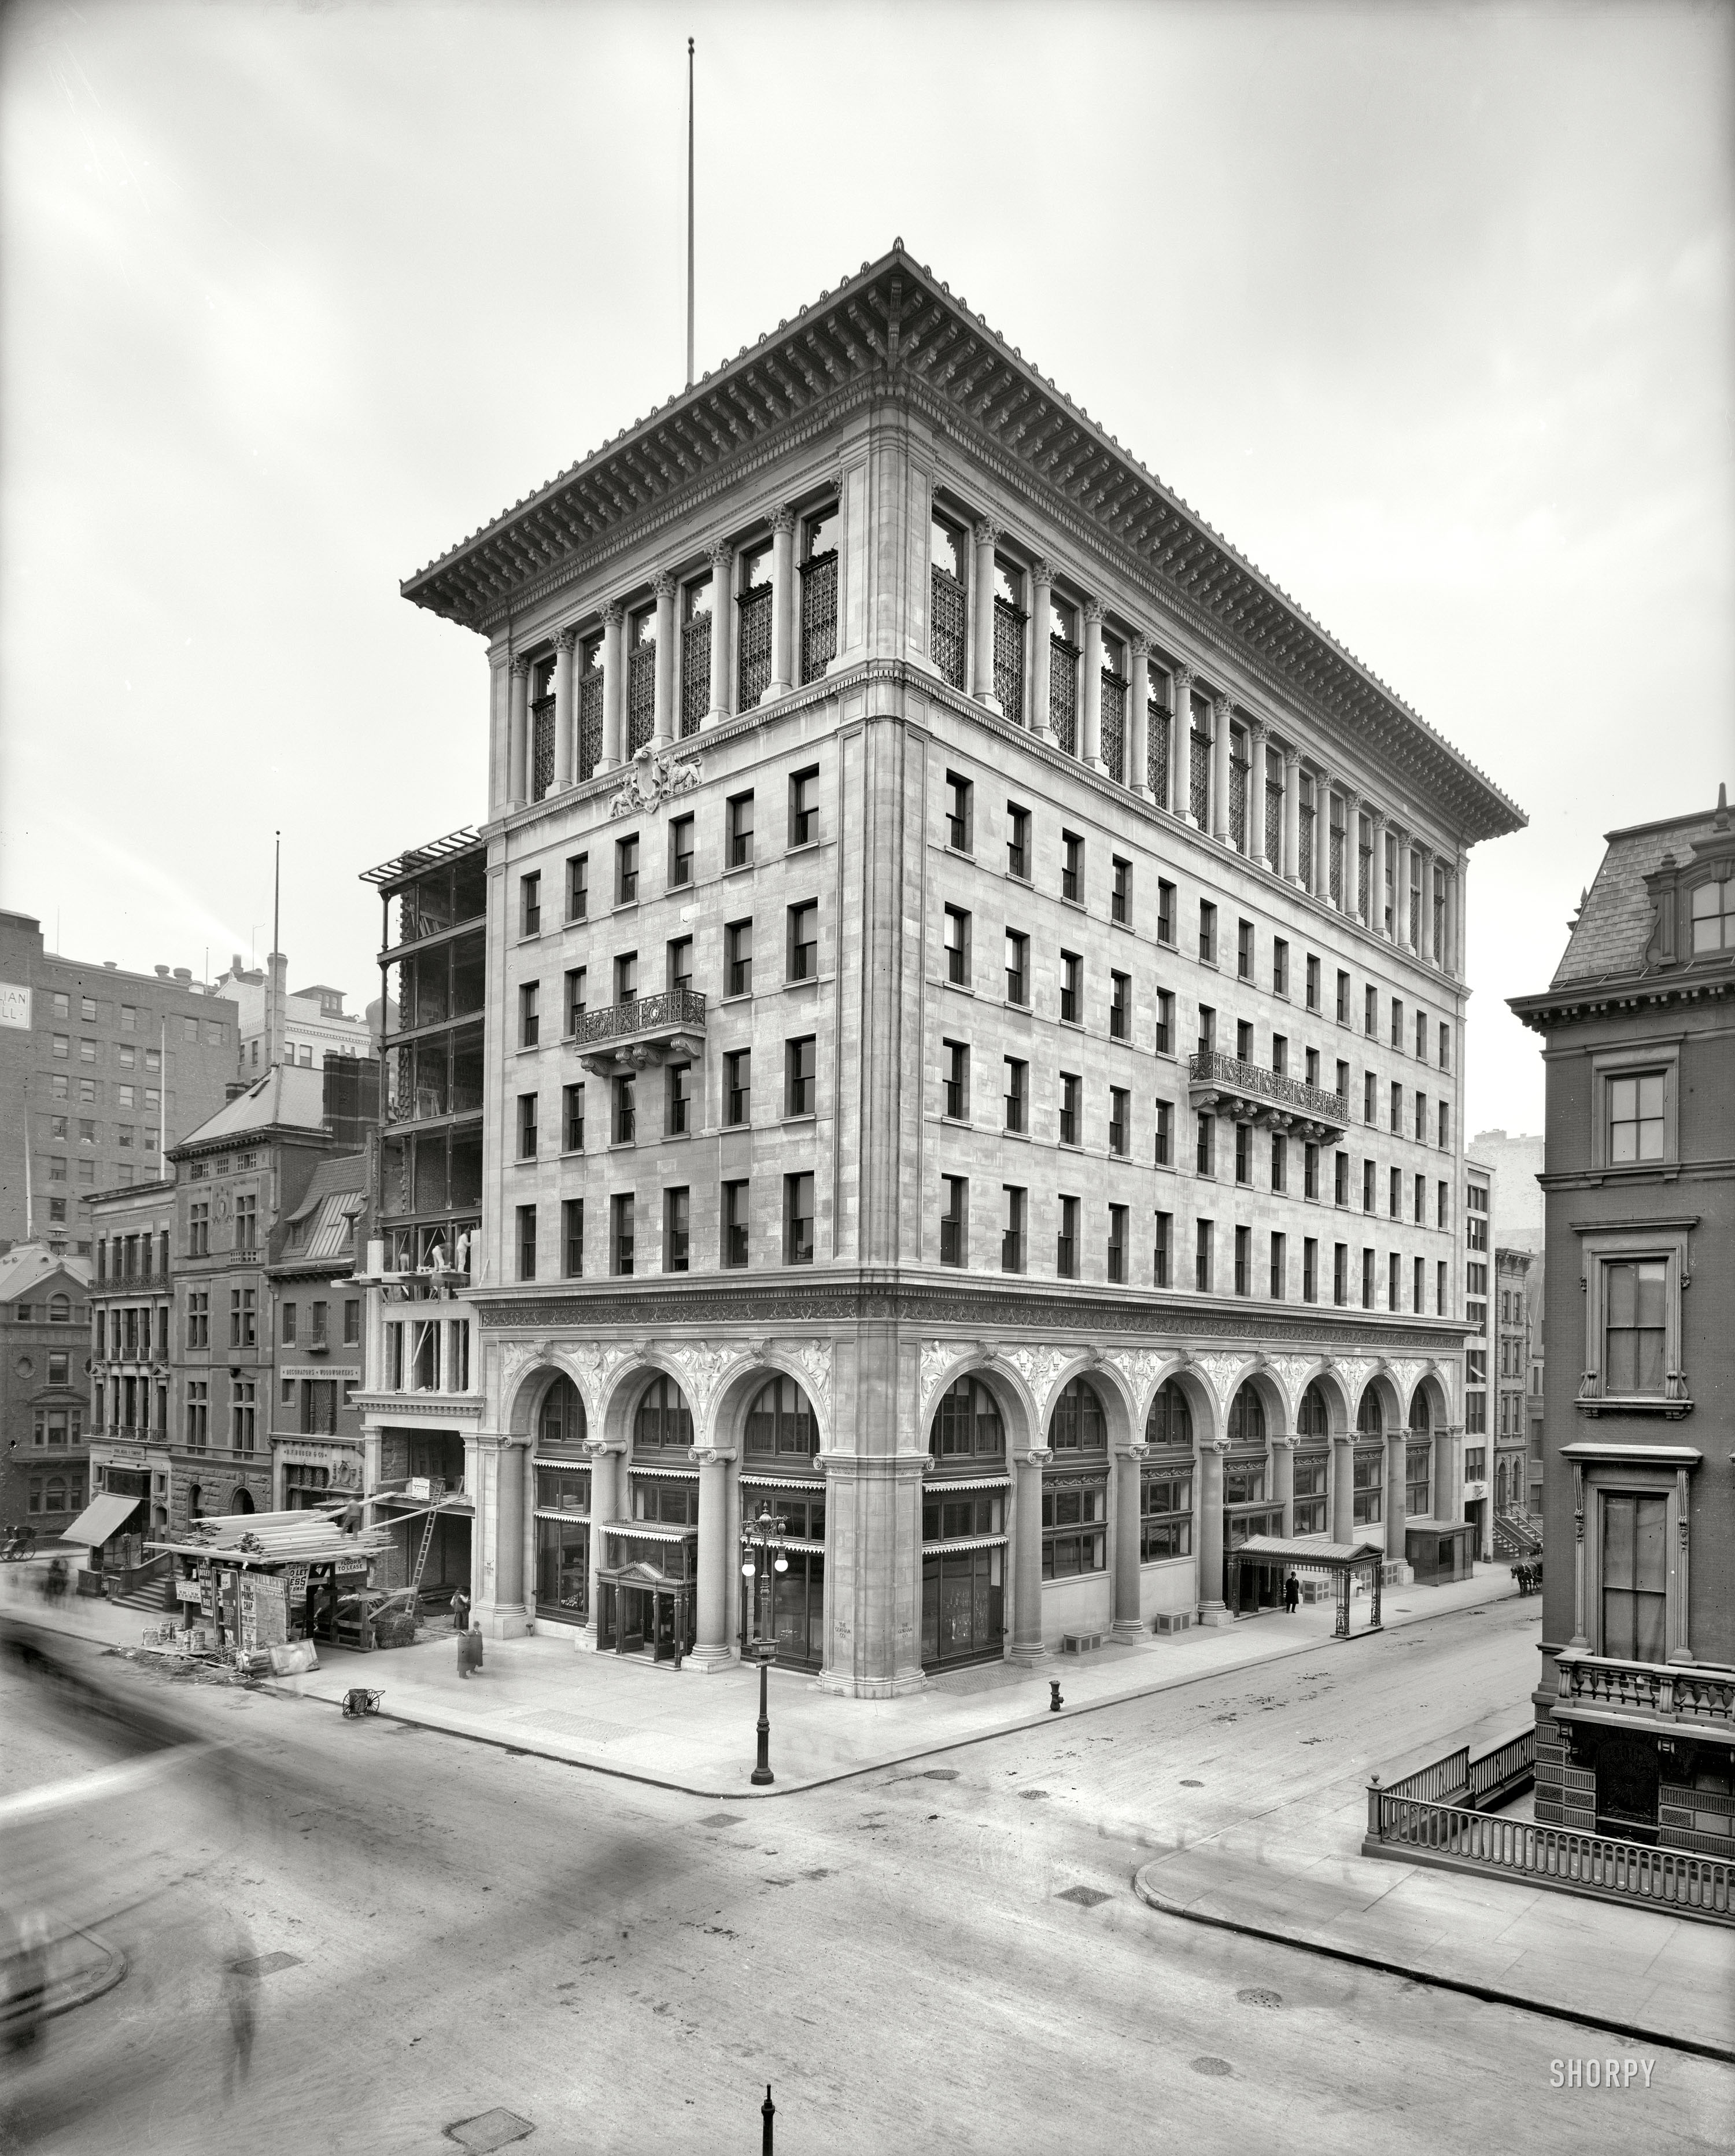 New York circa 1906. "Gorham Co. building, Fifth Avenue and 36th Street." New headquarters, designed by Stanford White, of the noted silver-making concern. 8x10 inch dry plate glass negative, Detroit Publishing Company. View full size.